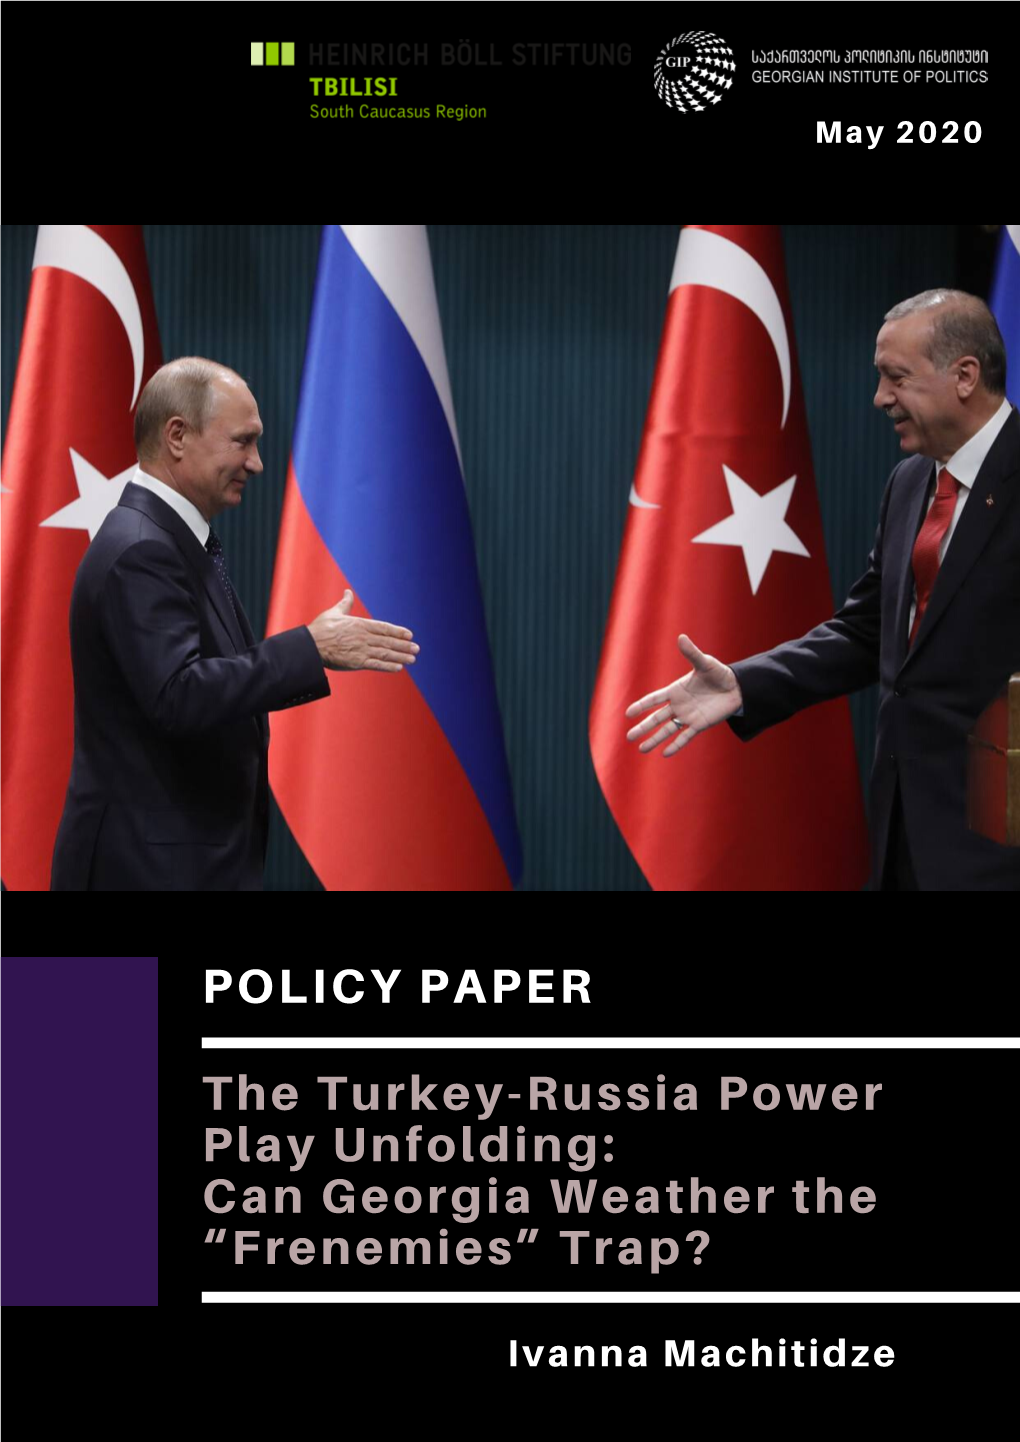 The Turkey-Russia Power Play Unfolding: Can Georgia Weather the “Frenemies” Trap?